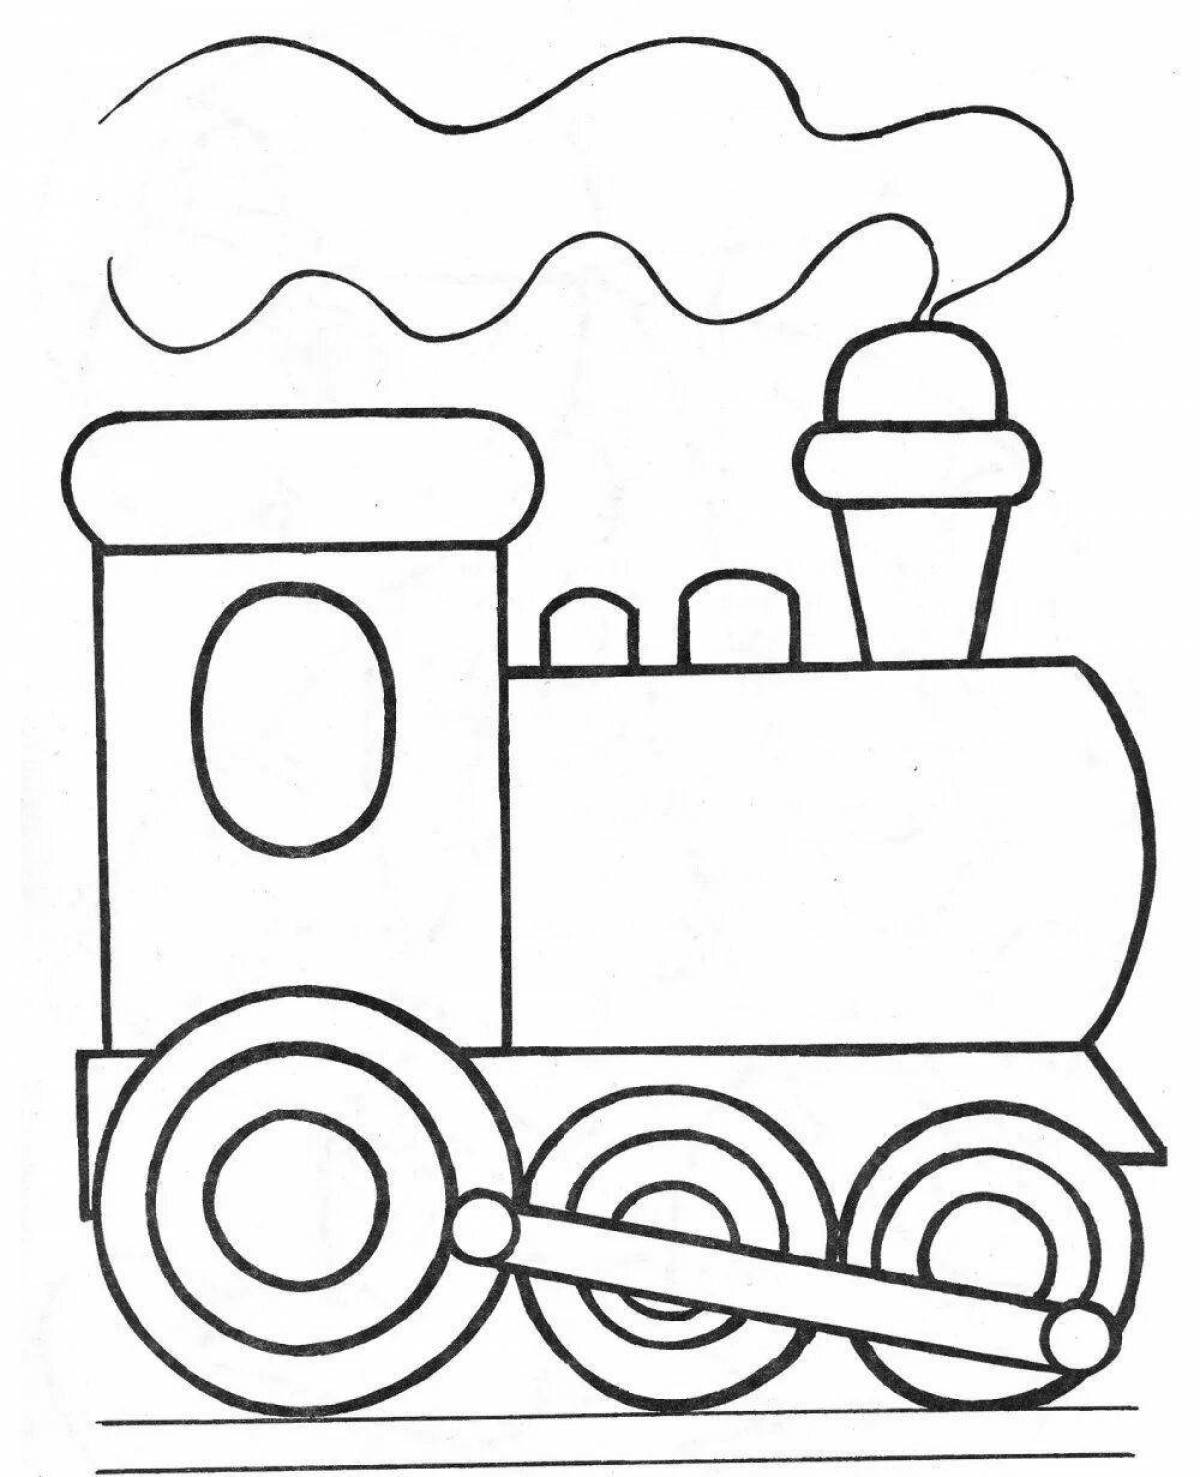 Creative coloring book for little boys